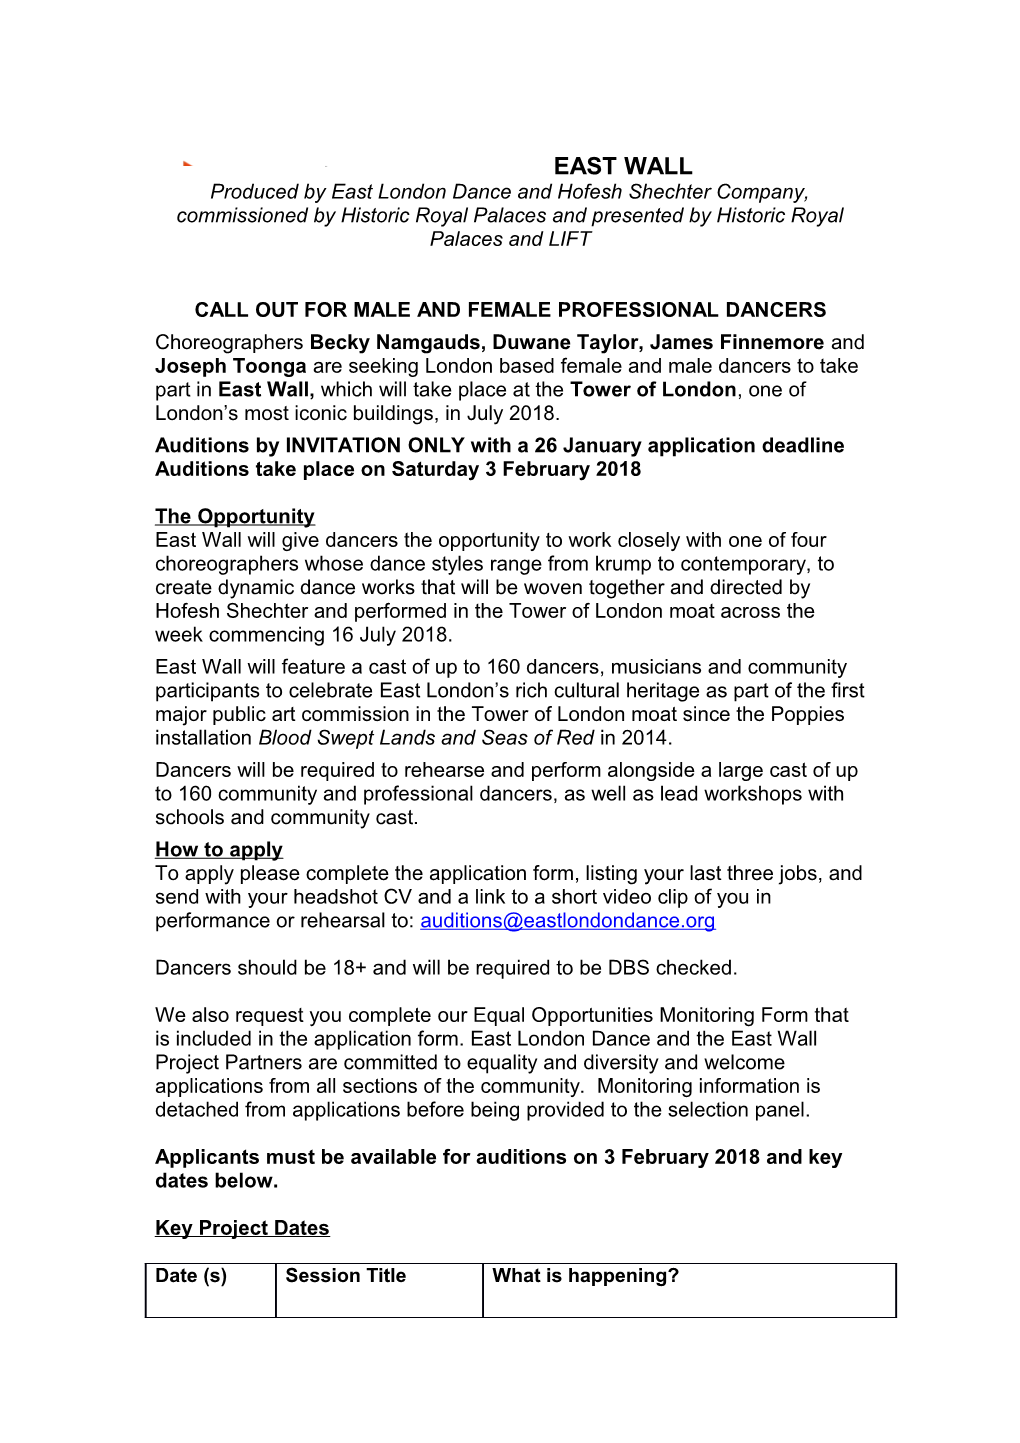 Call out for Male and Female Professional Dancers